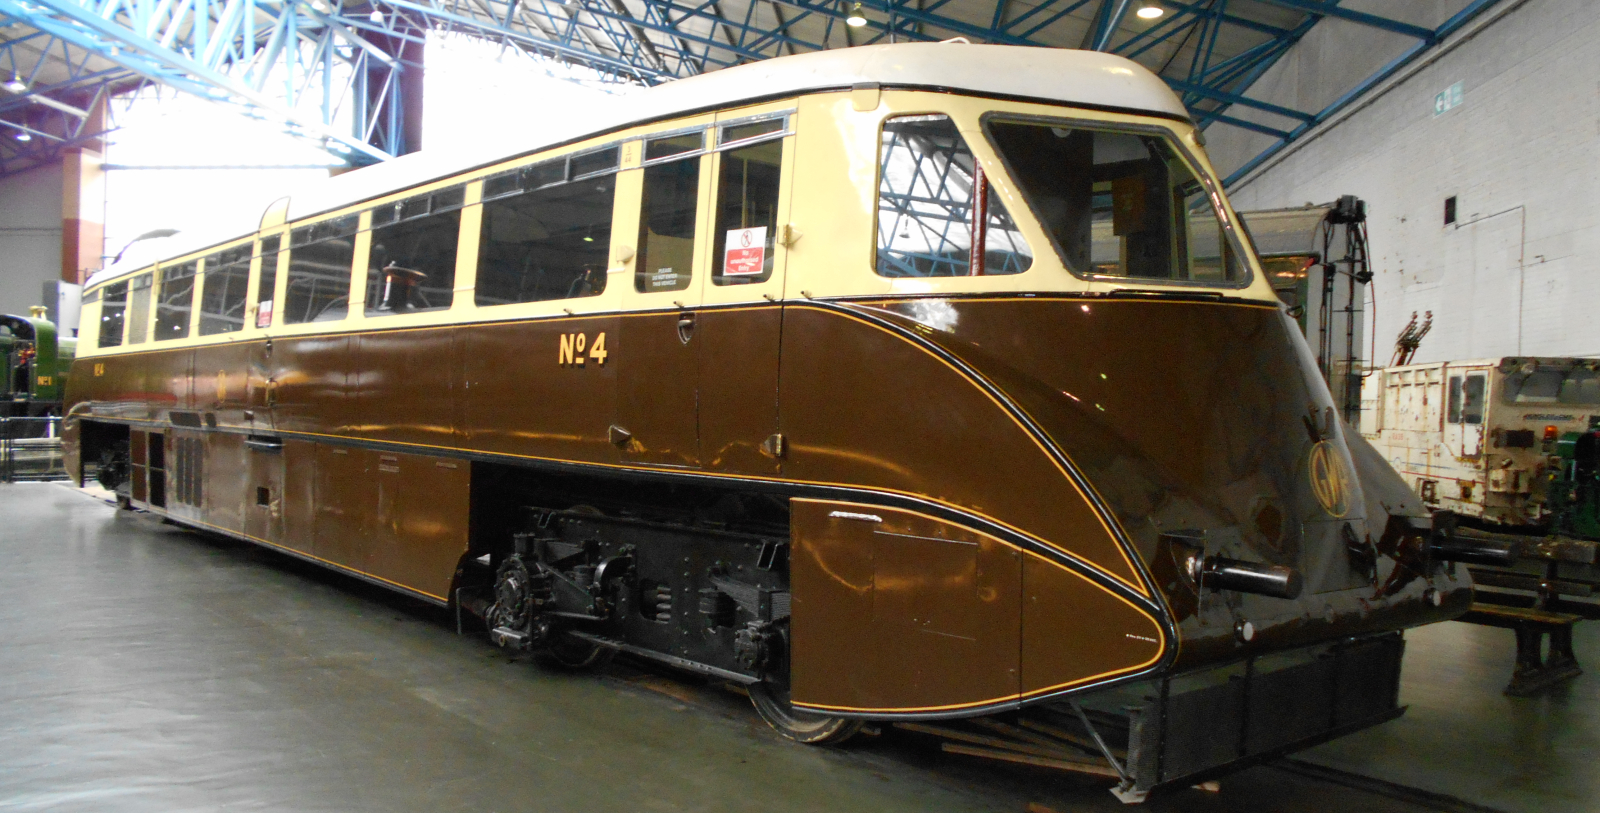 No. 4 in the National Railway Museum, York